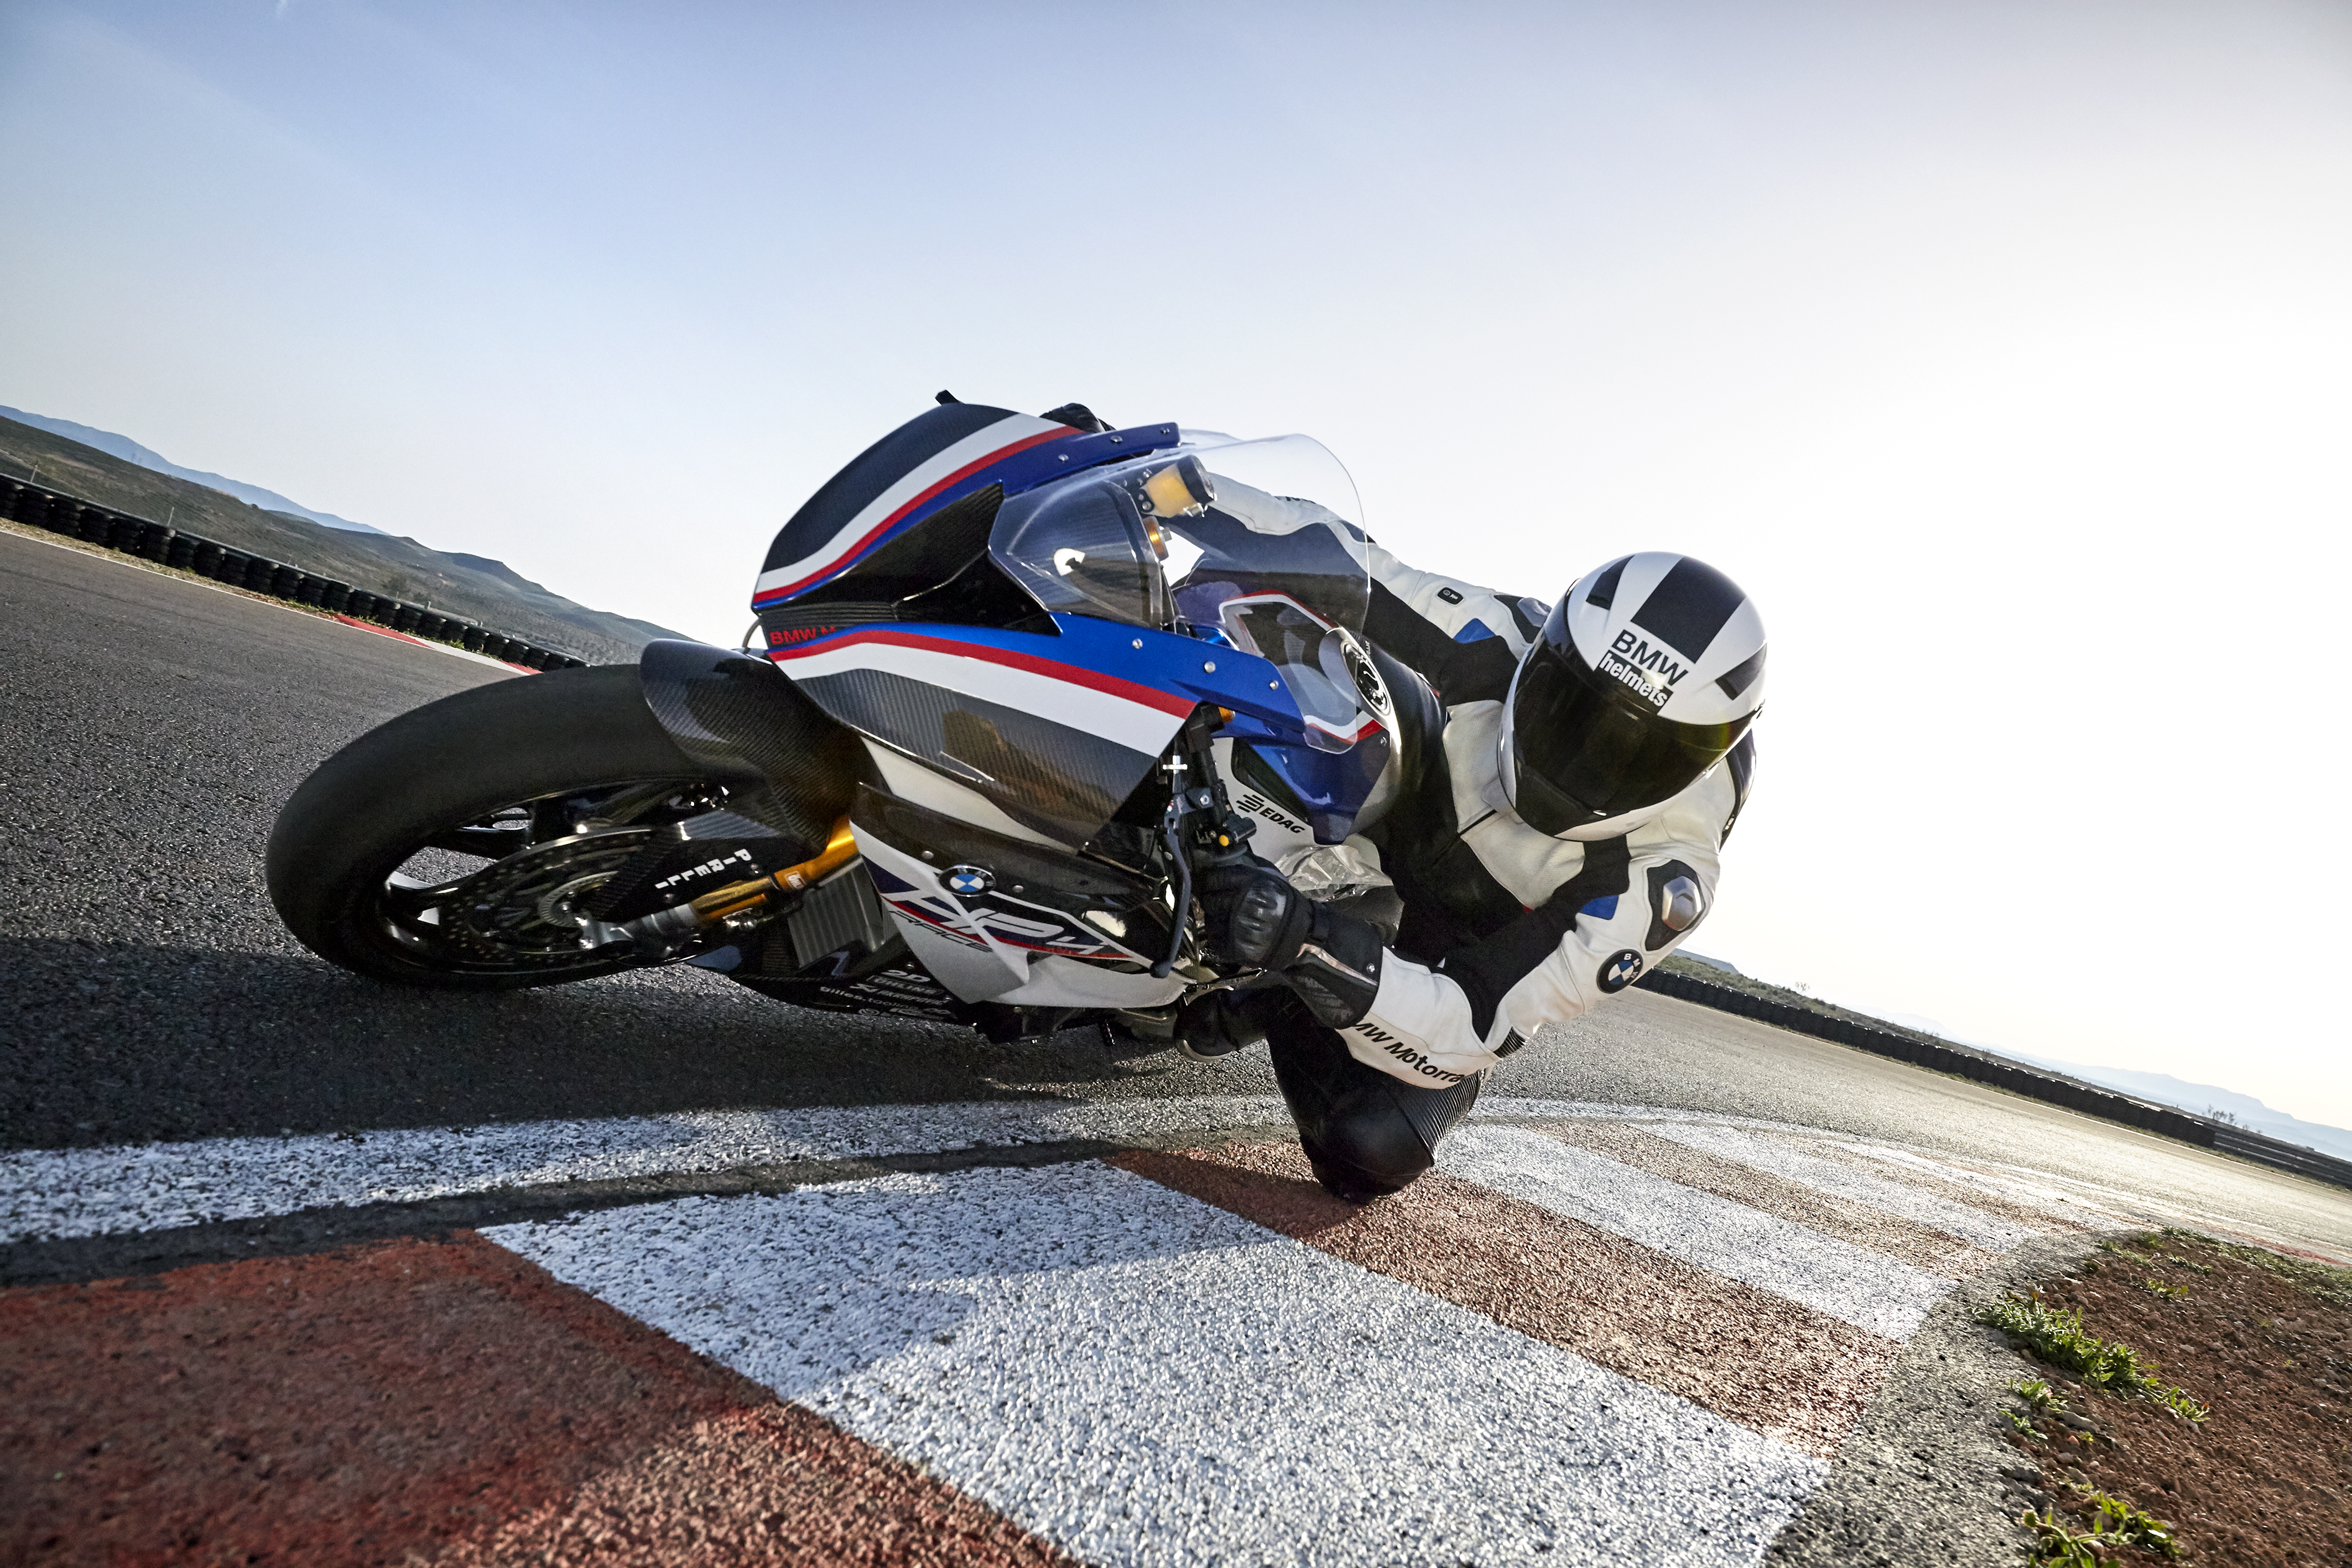 The 17 Bmw Hp4 Race Is The Bike Carbon Fiber Dreams Are Made Of Cycle World